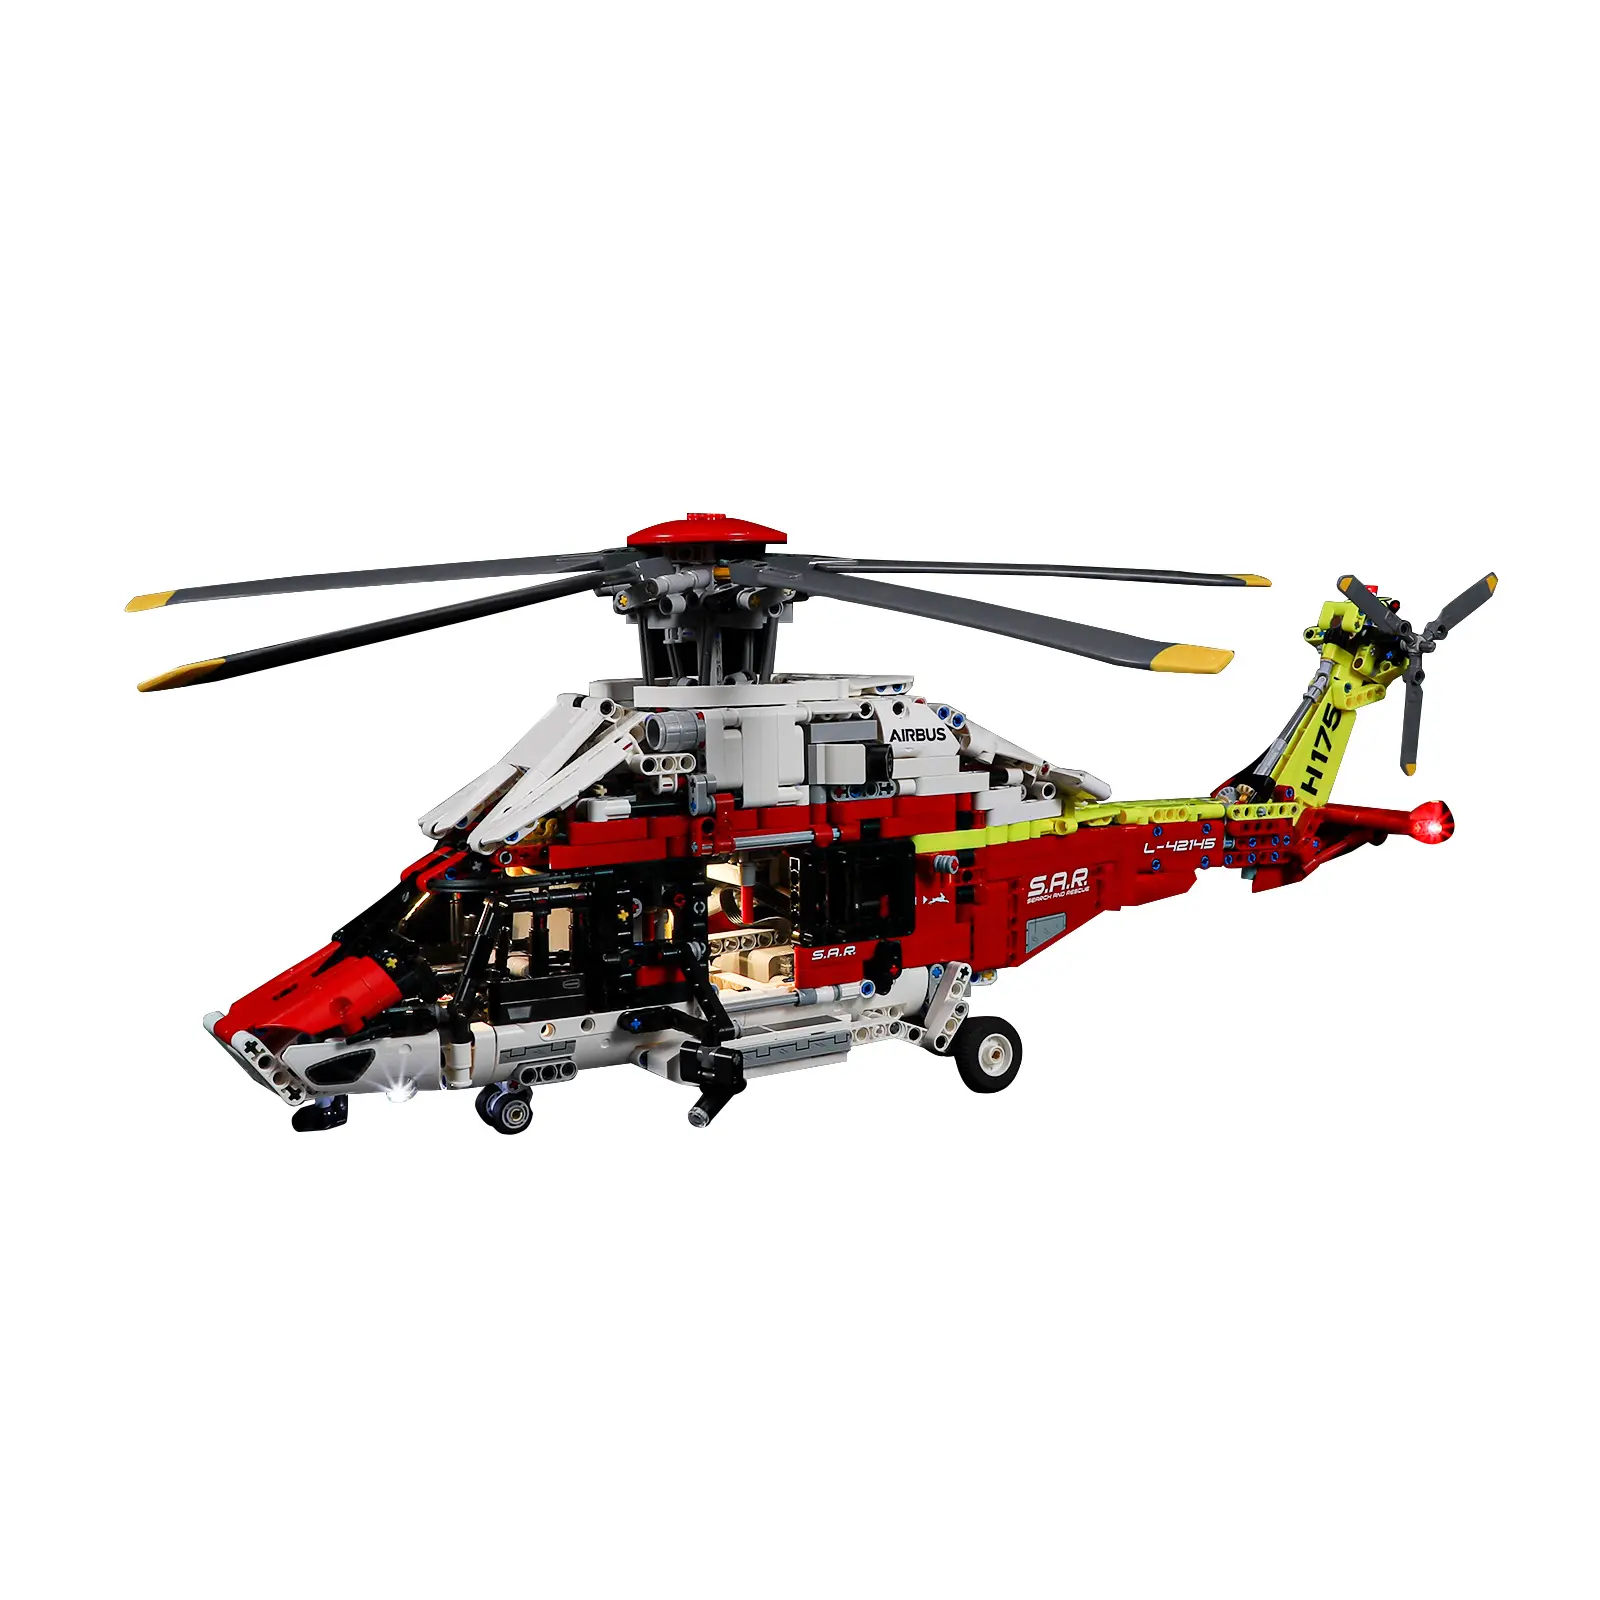 74666 Helicopter Blocks for Kids LED Airplane Building block for kids Plastic Remote Control Aircraft Flying toy bricks